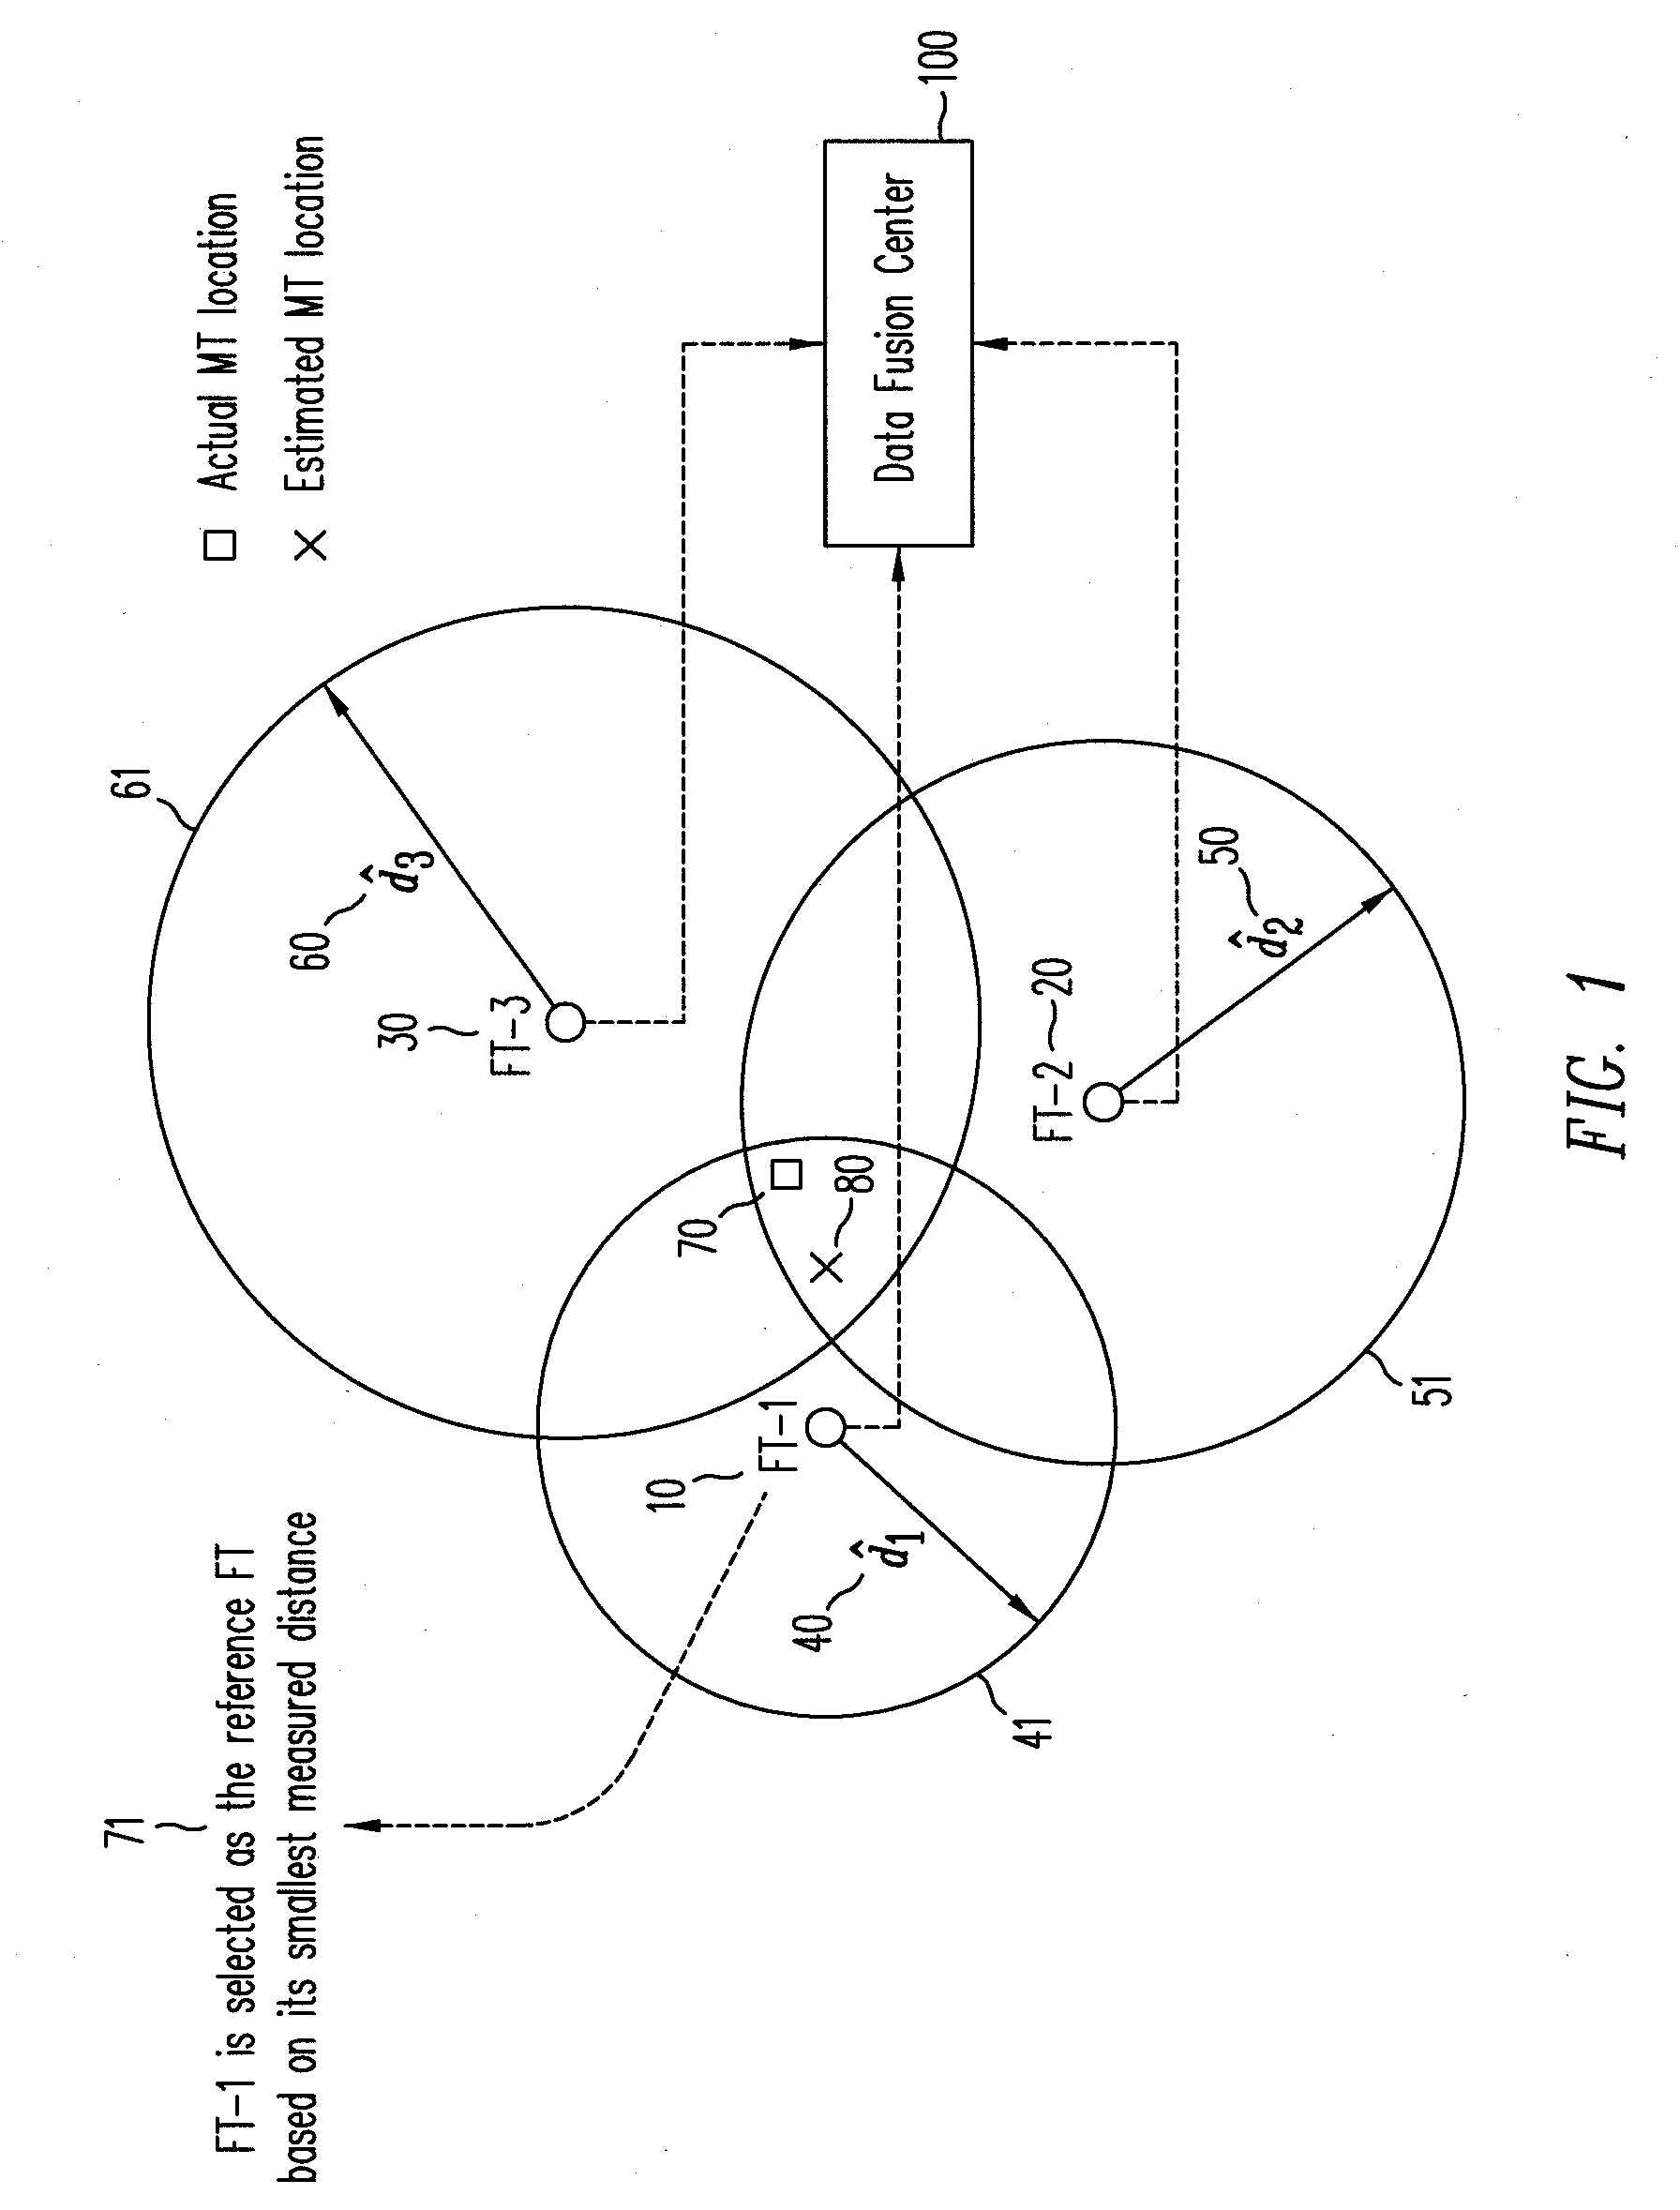 Method for an improved linear least squares estimation of a mobile terminal's location under los and nlos conditions and using map information